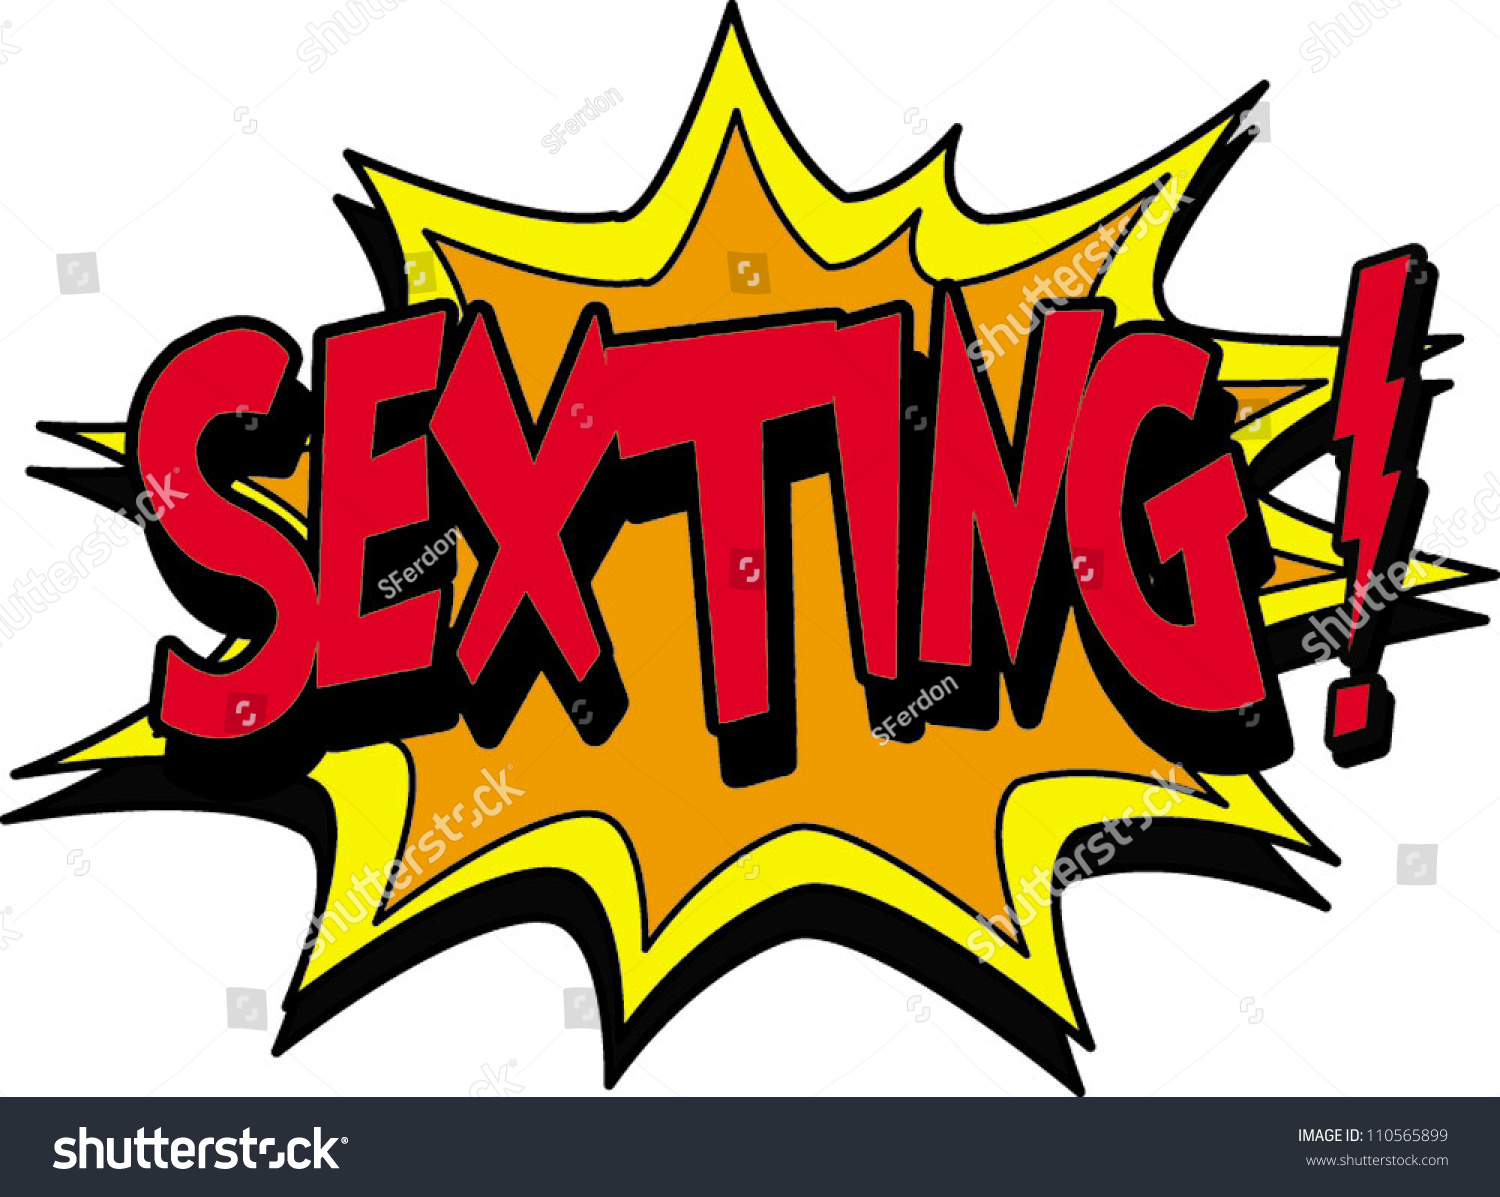 Of sexting art the How To